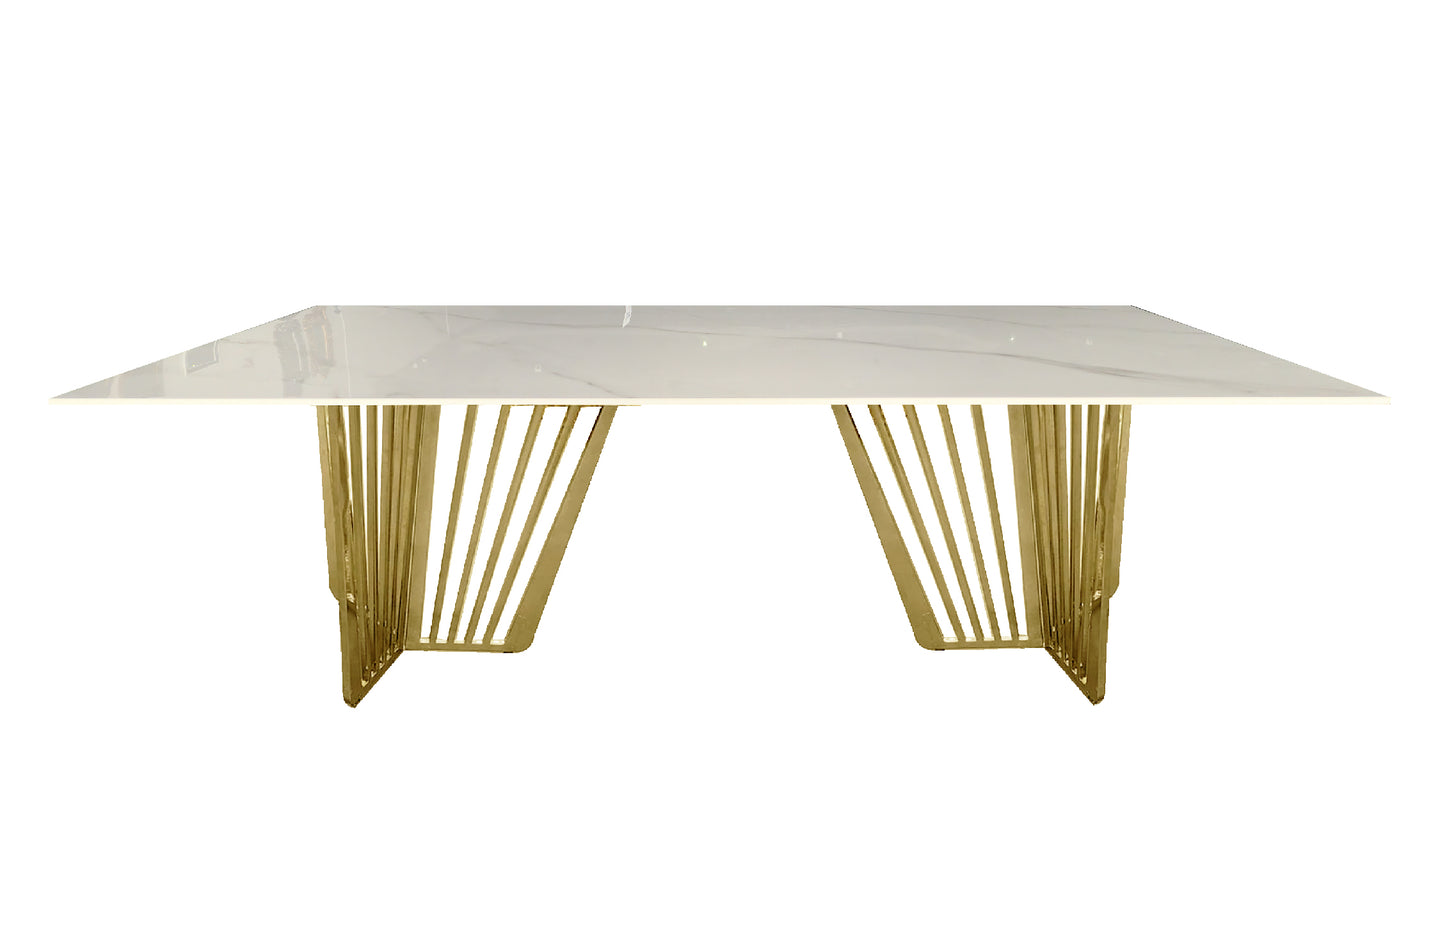 Serena Marble Dining Table - 3 Colours Available